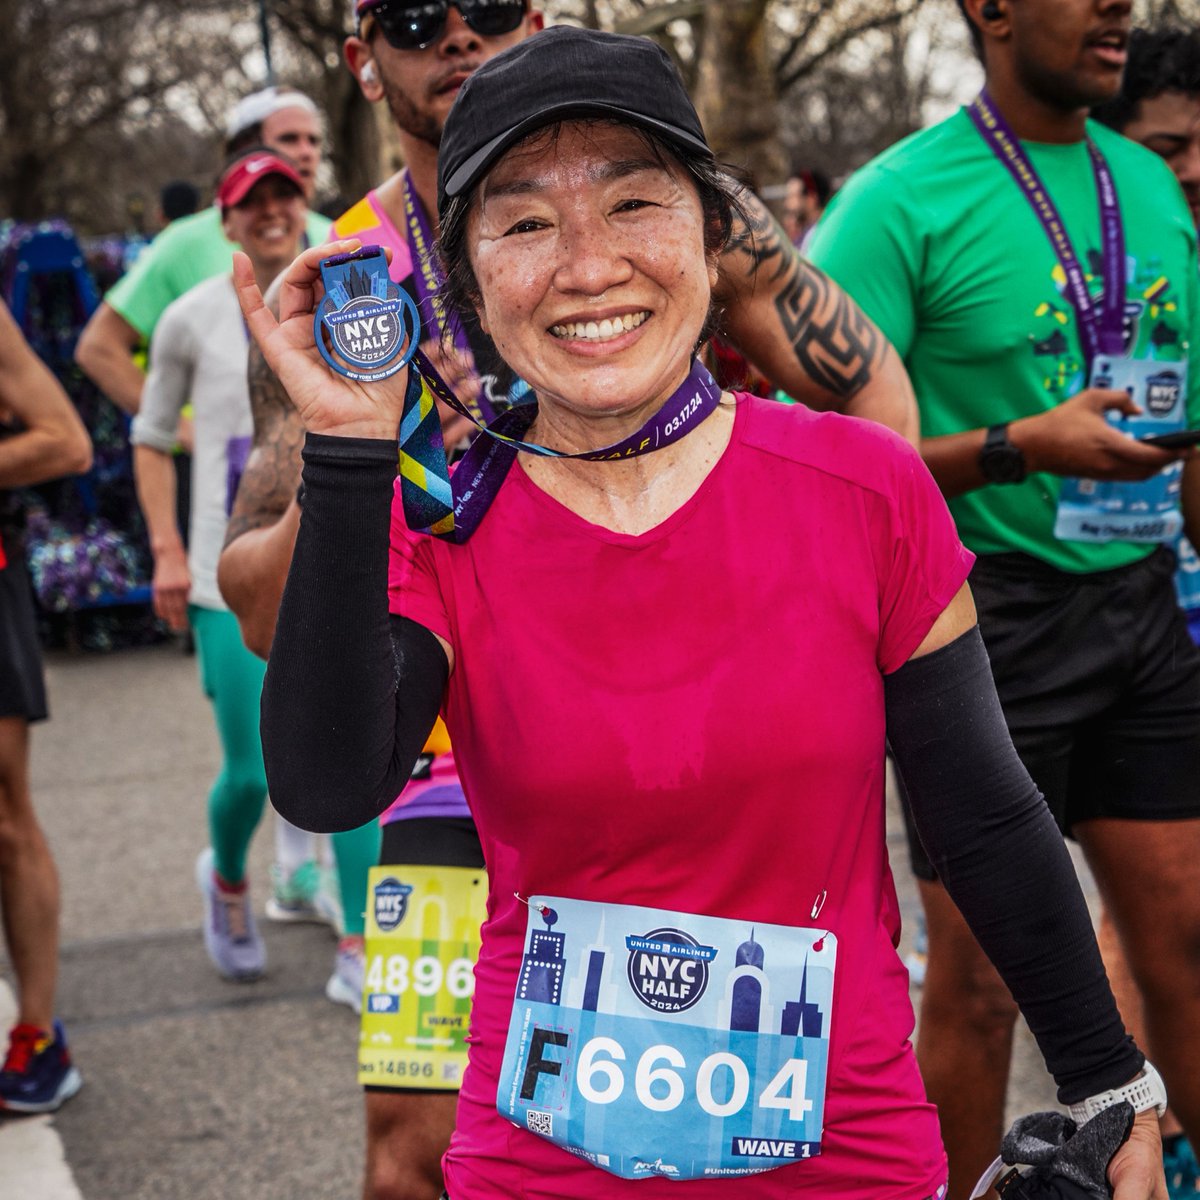 Kumiko Hart was born in Tokyo, has lived in NYC since 1992, and has run 148 NYRR races including the New York City Marathon 15 times.🫢 Learn more on our blog as Kumiko talks about her passion for running, ultrarunning, her Japanese heritage, and more: bit.ly/49XfewI